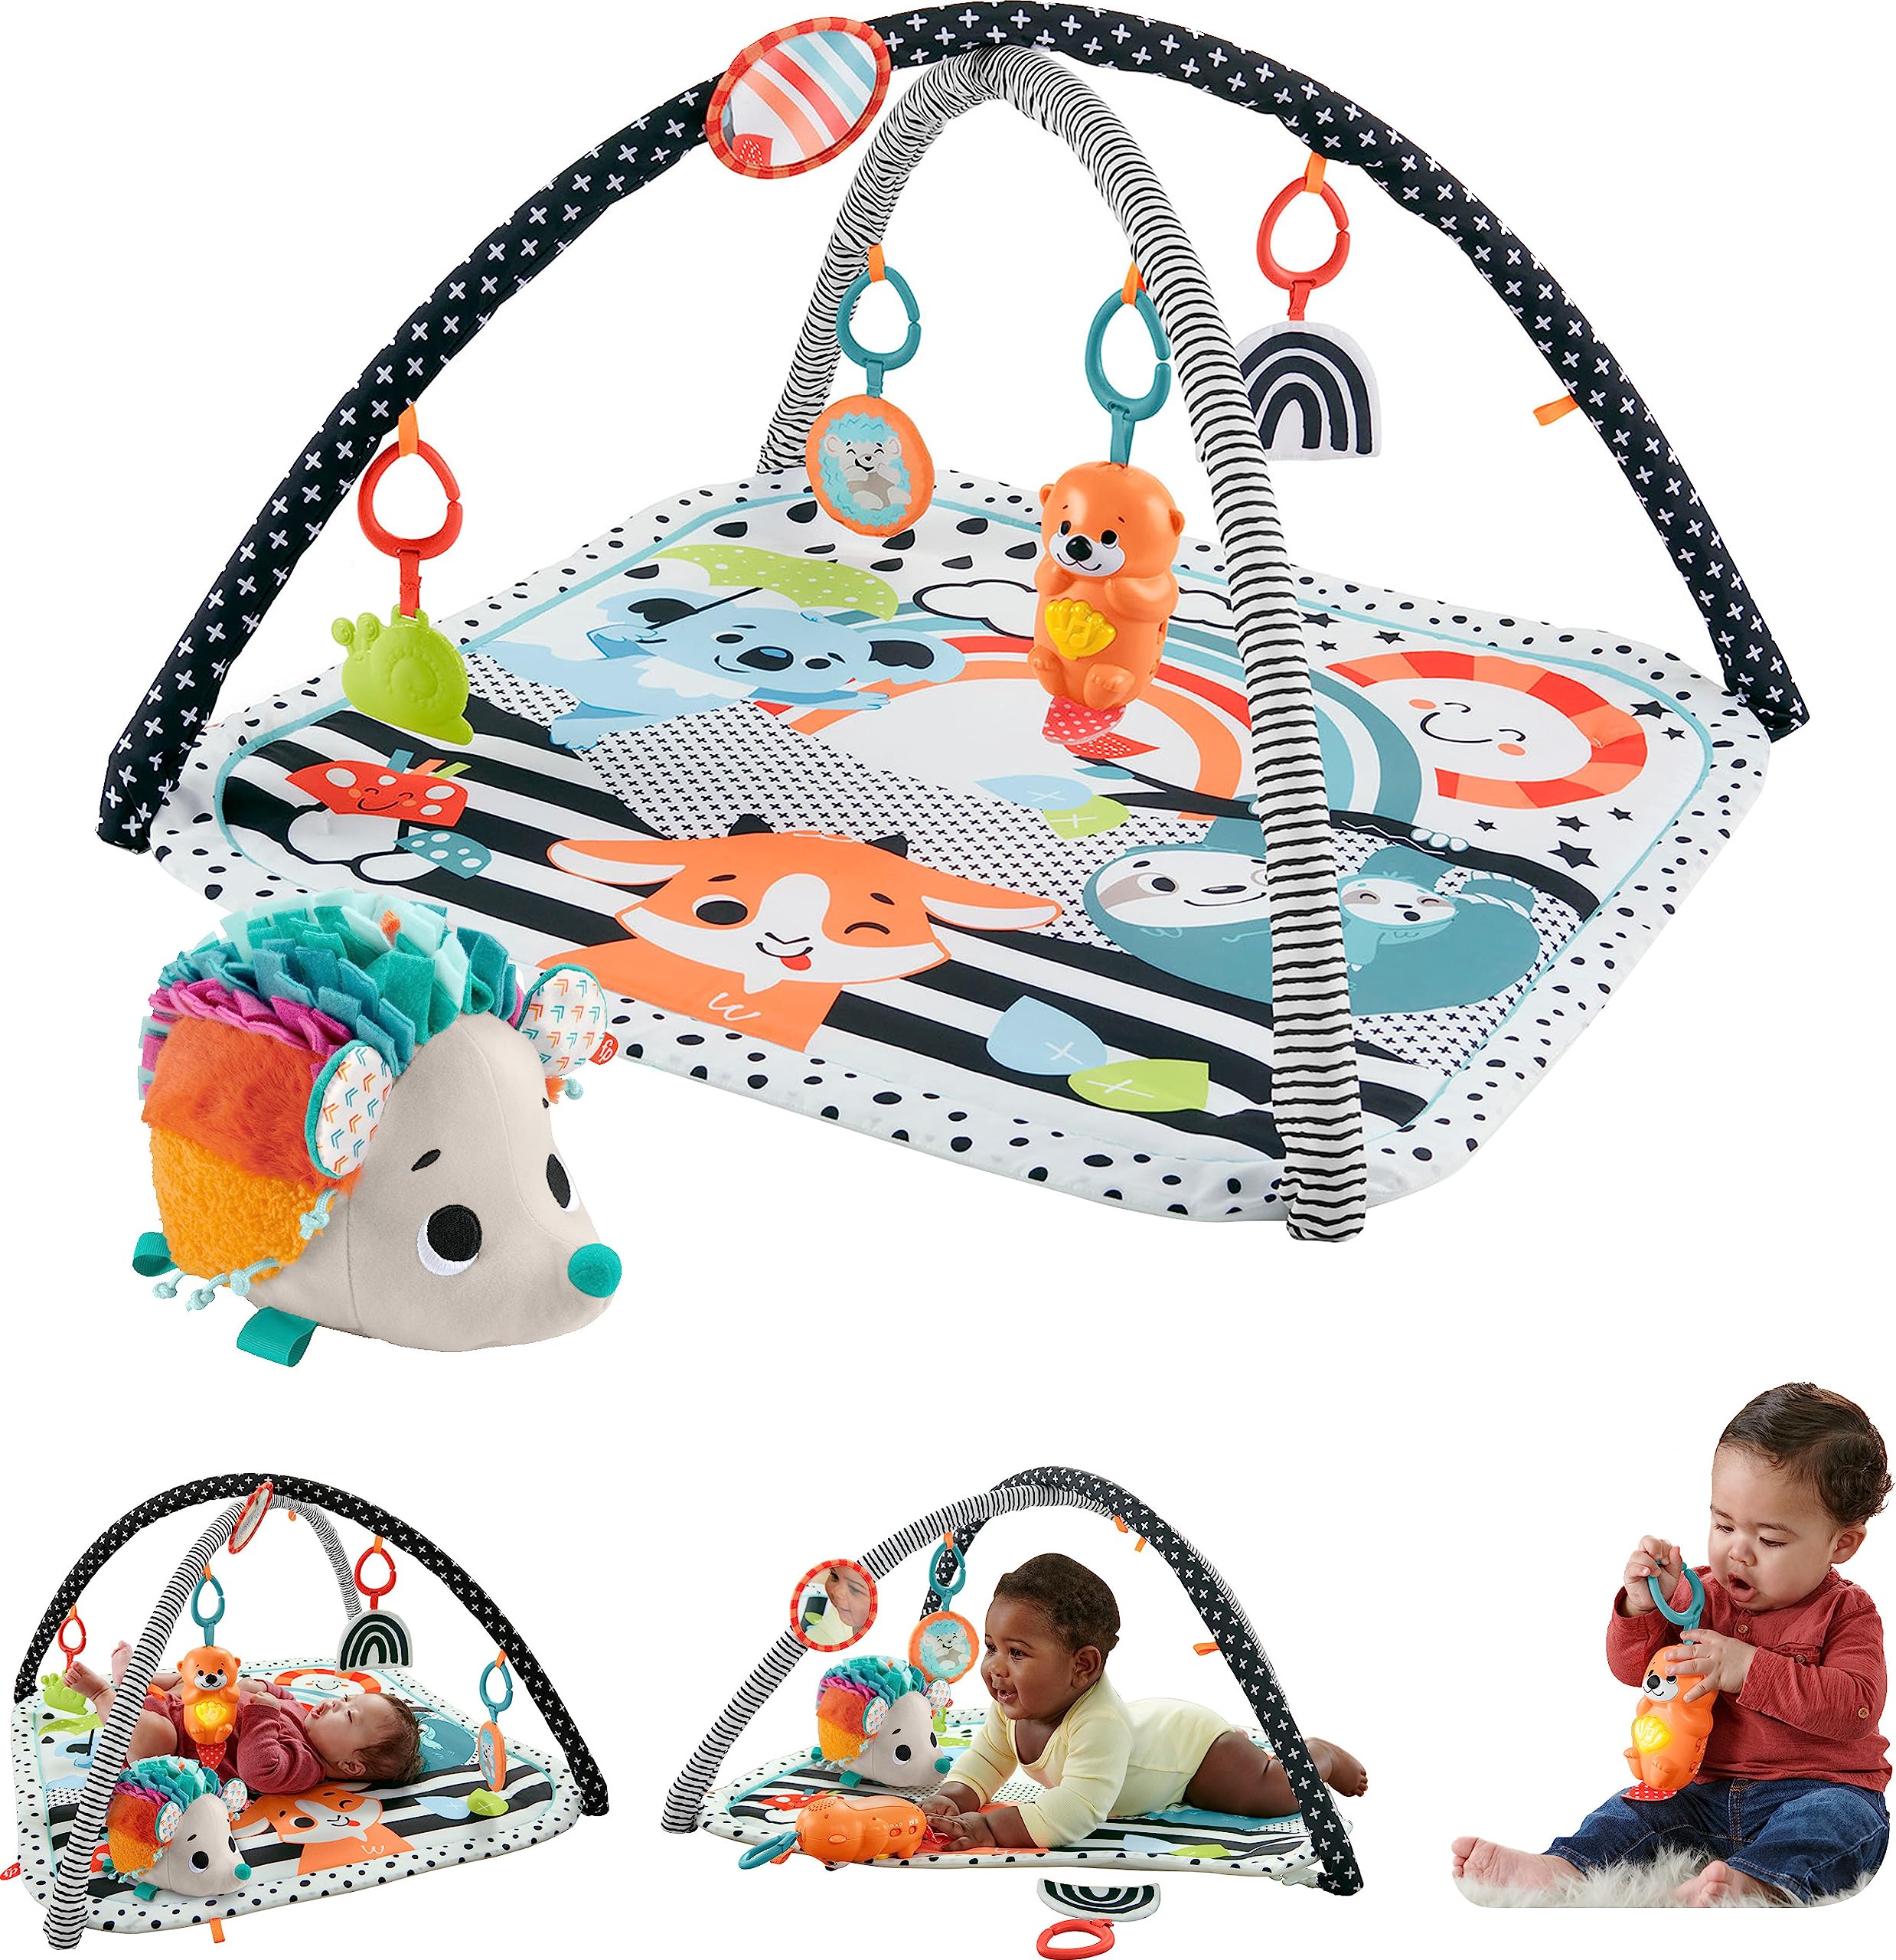 Fisher-Price Baby Gift Set 3-In-1 Music, Glow And Grow Gym & Hedgehog Plush, Playmat With 5 Linkable Toys For Newborn Sensory Play